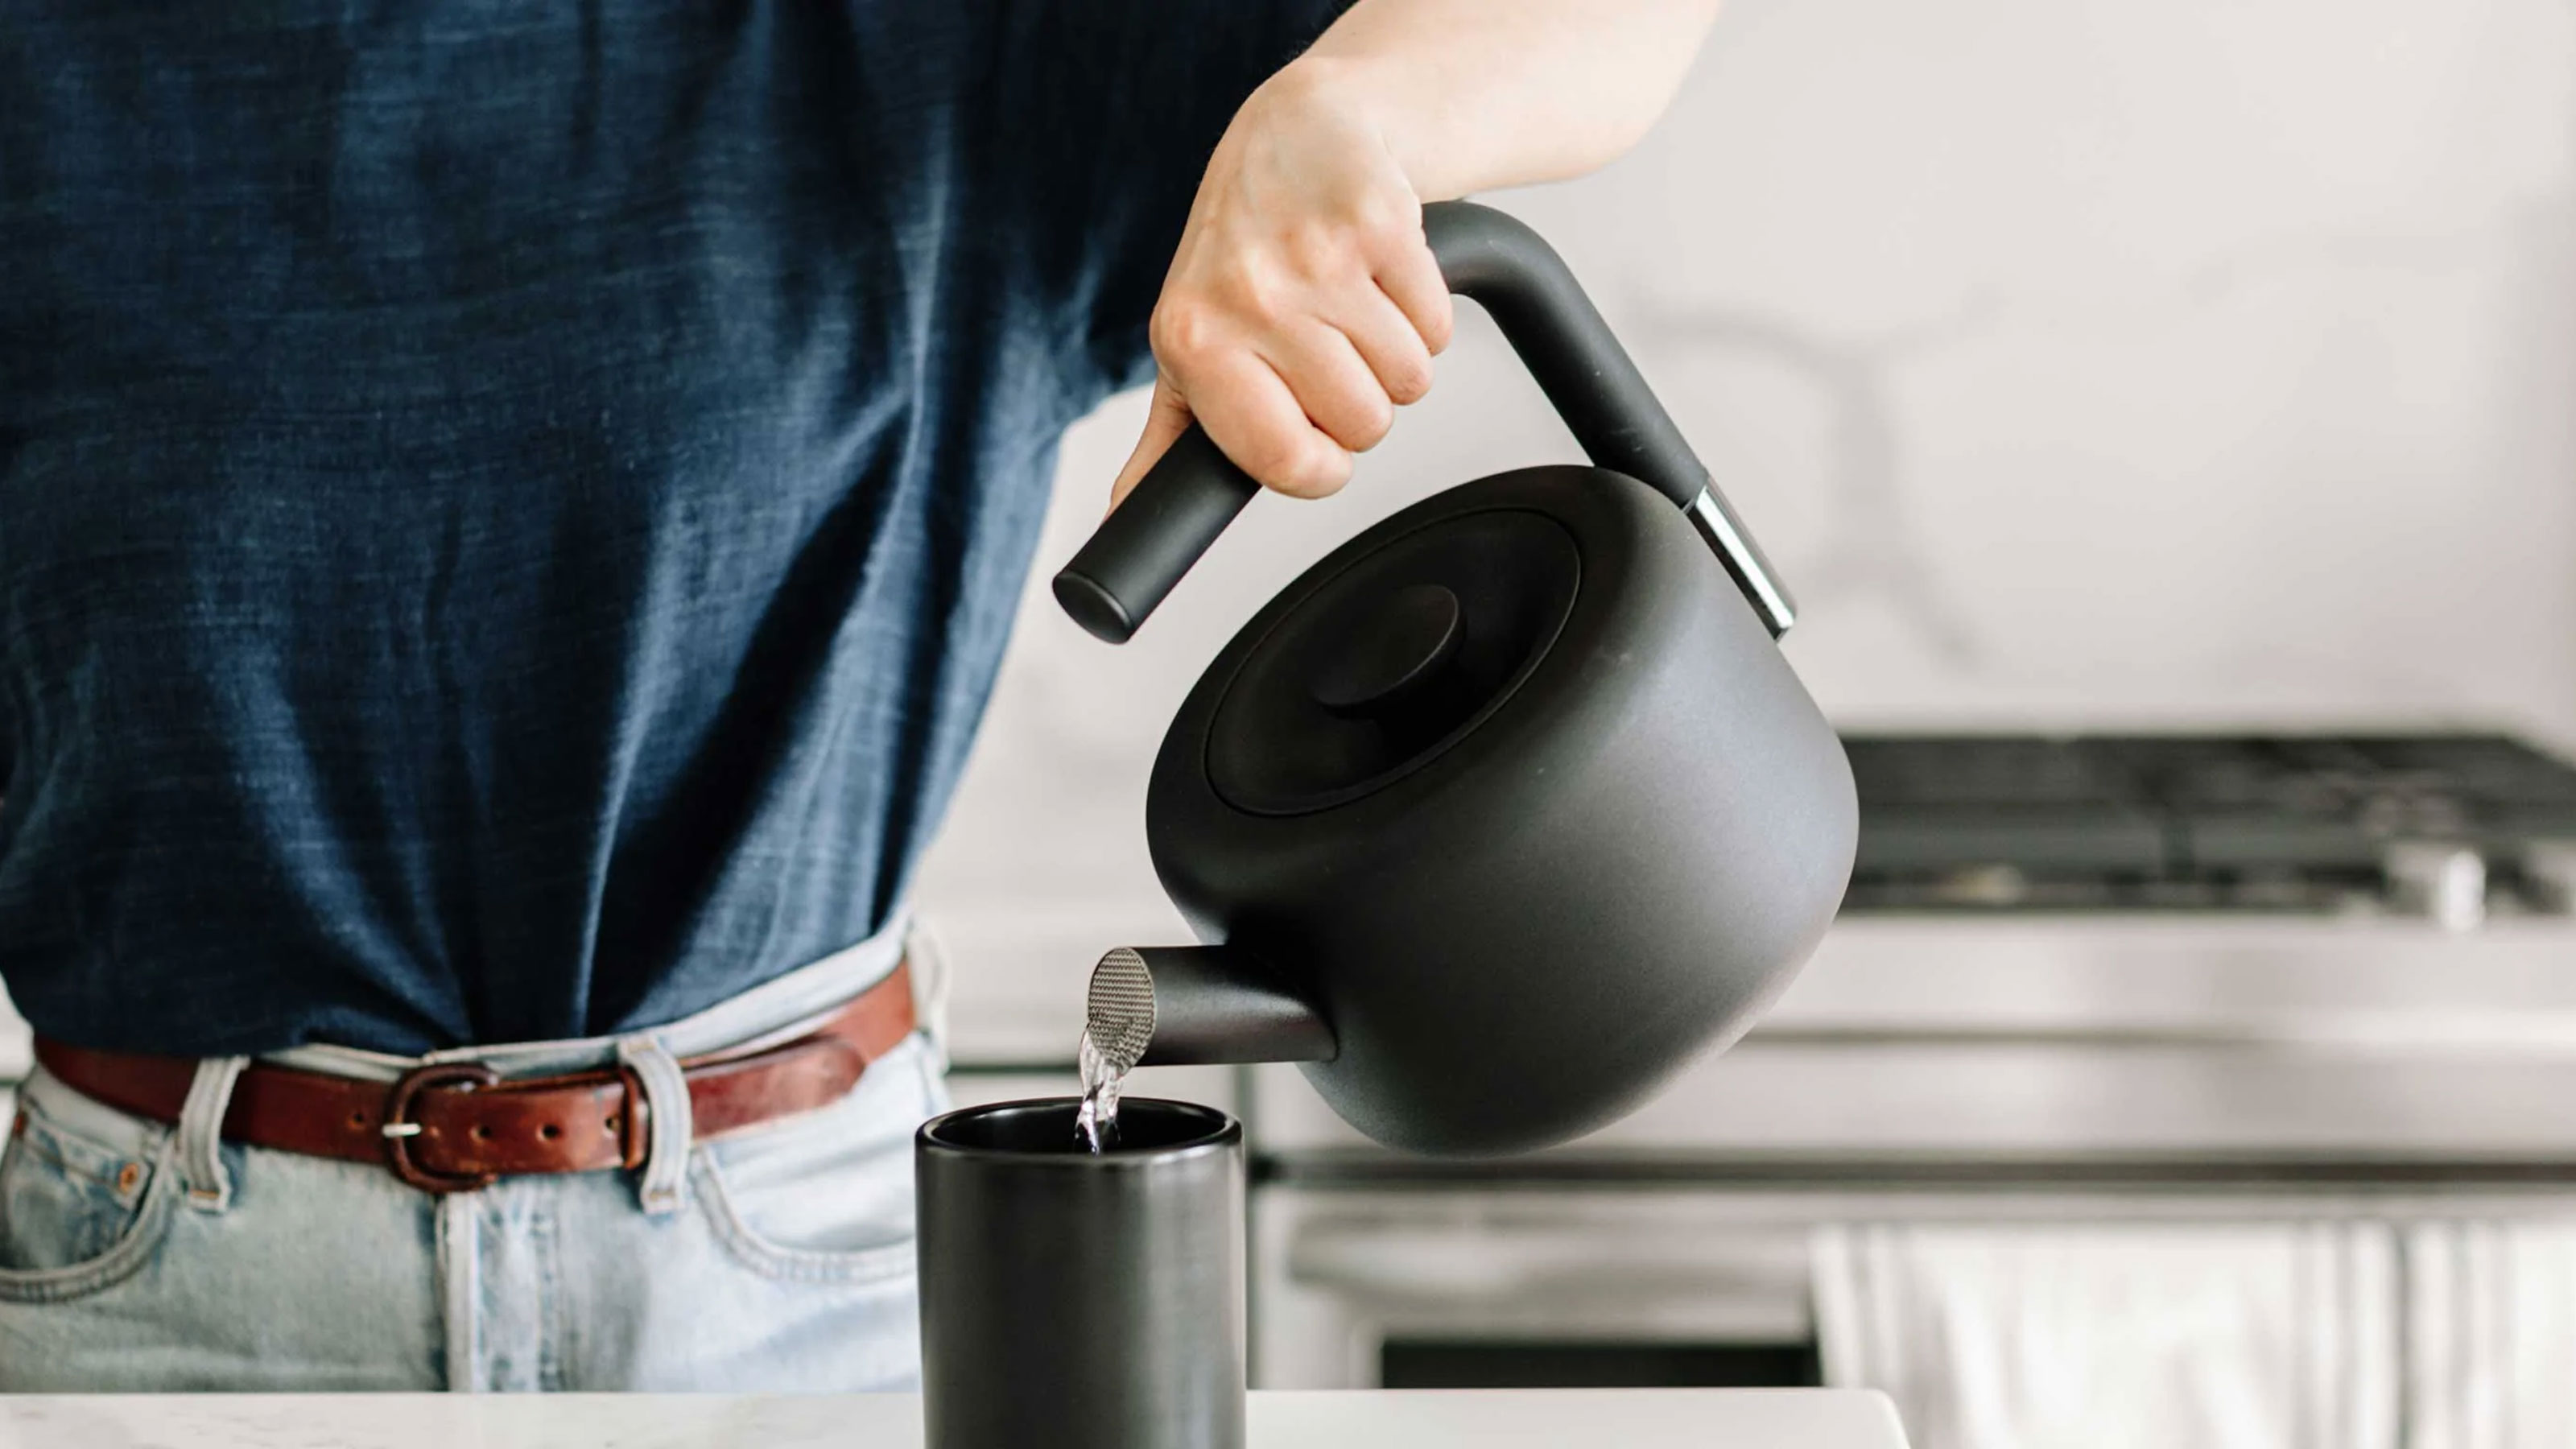 The best stovetop kettles: 8 top buys suitable for gas, electric